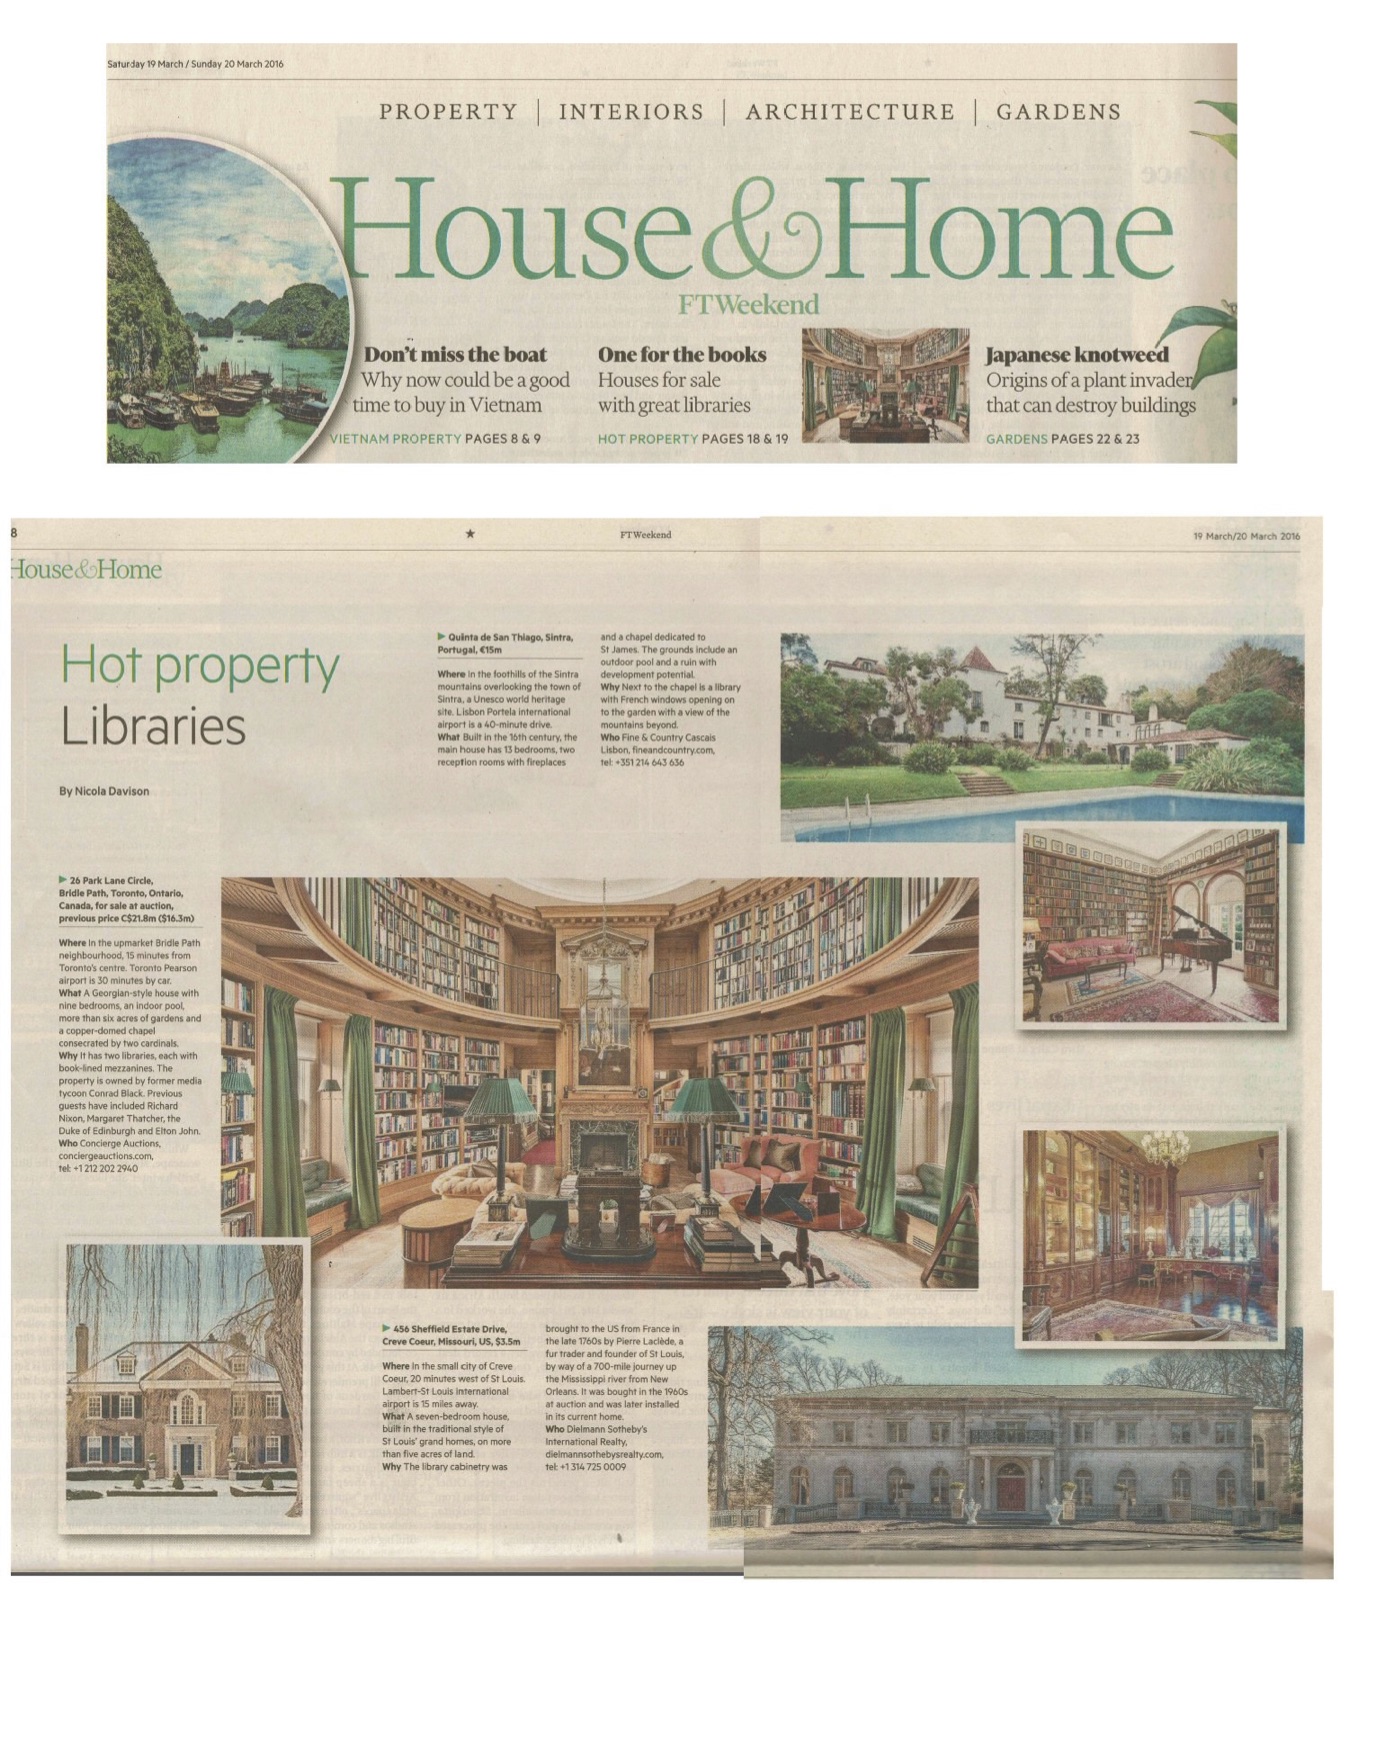 Financial Times – Hot property